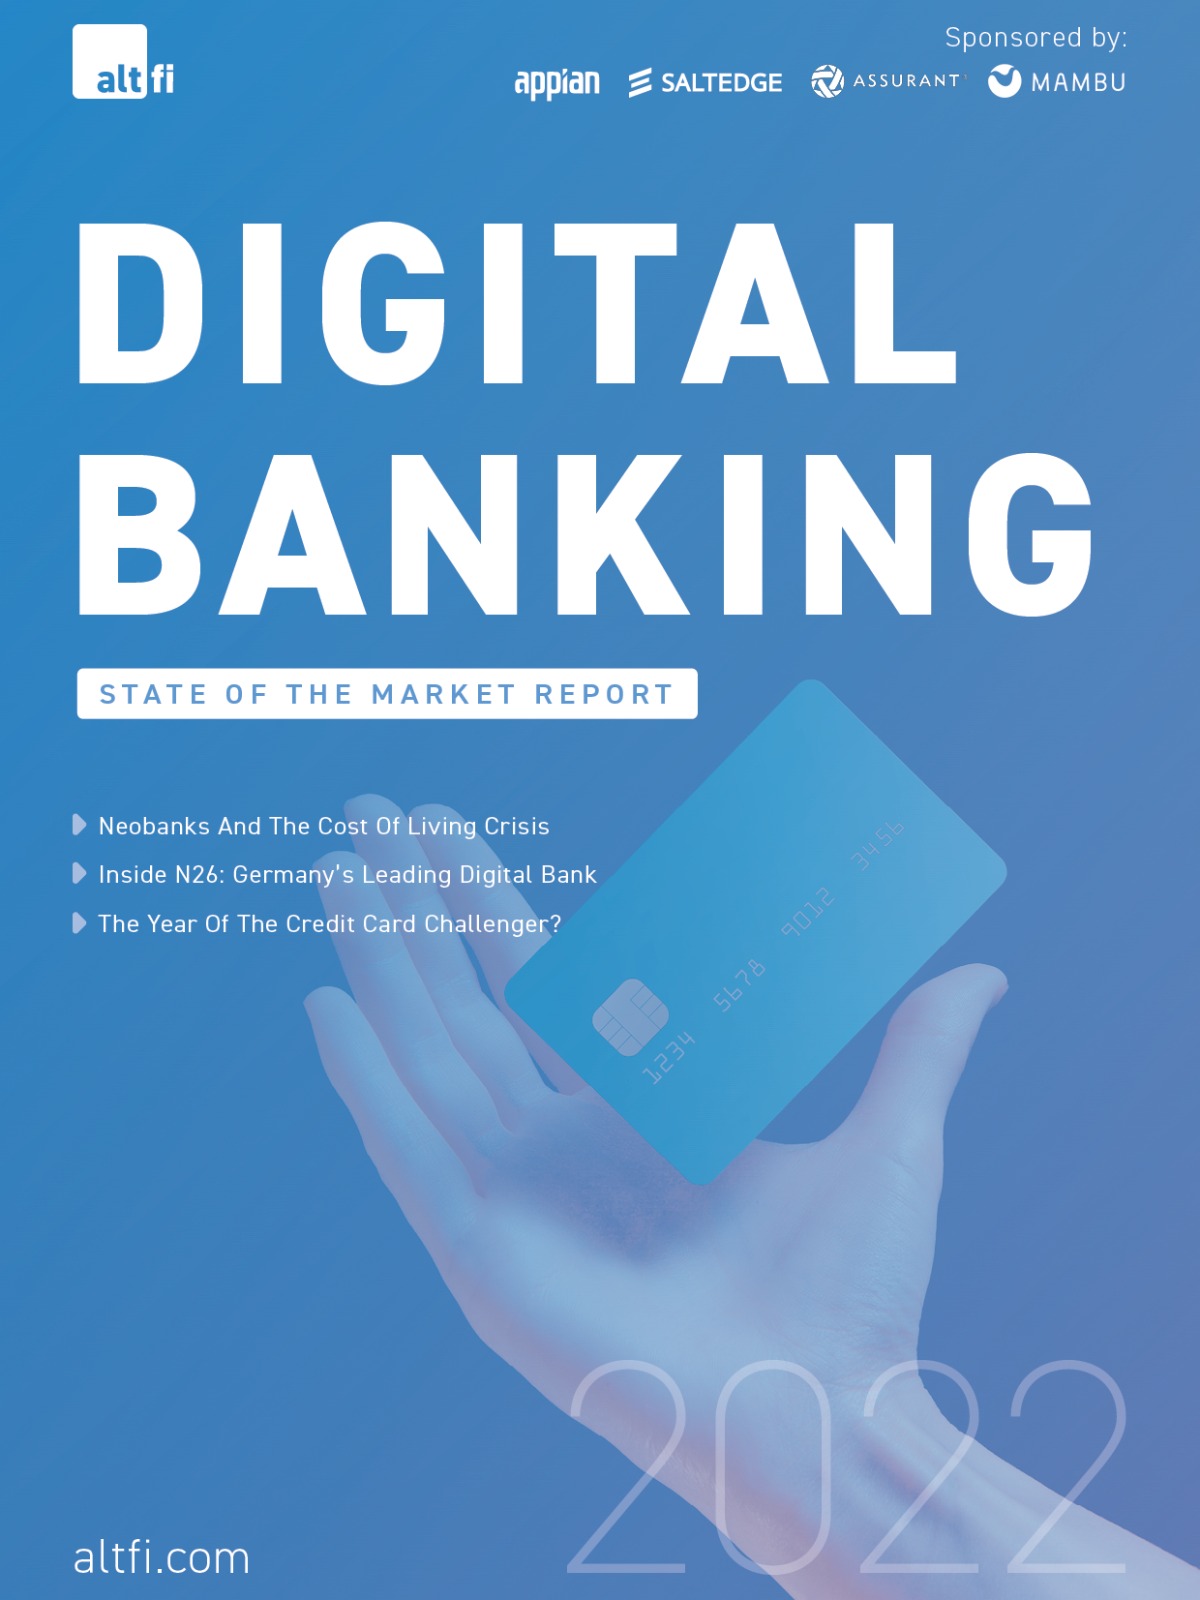  Digital Banking State of the Market Report 2022